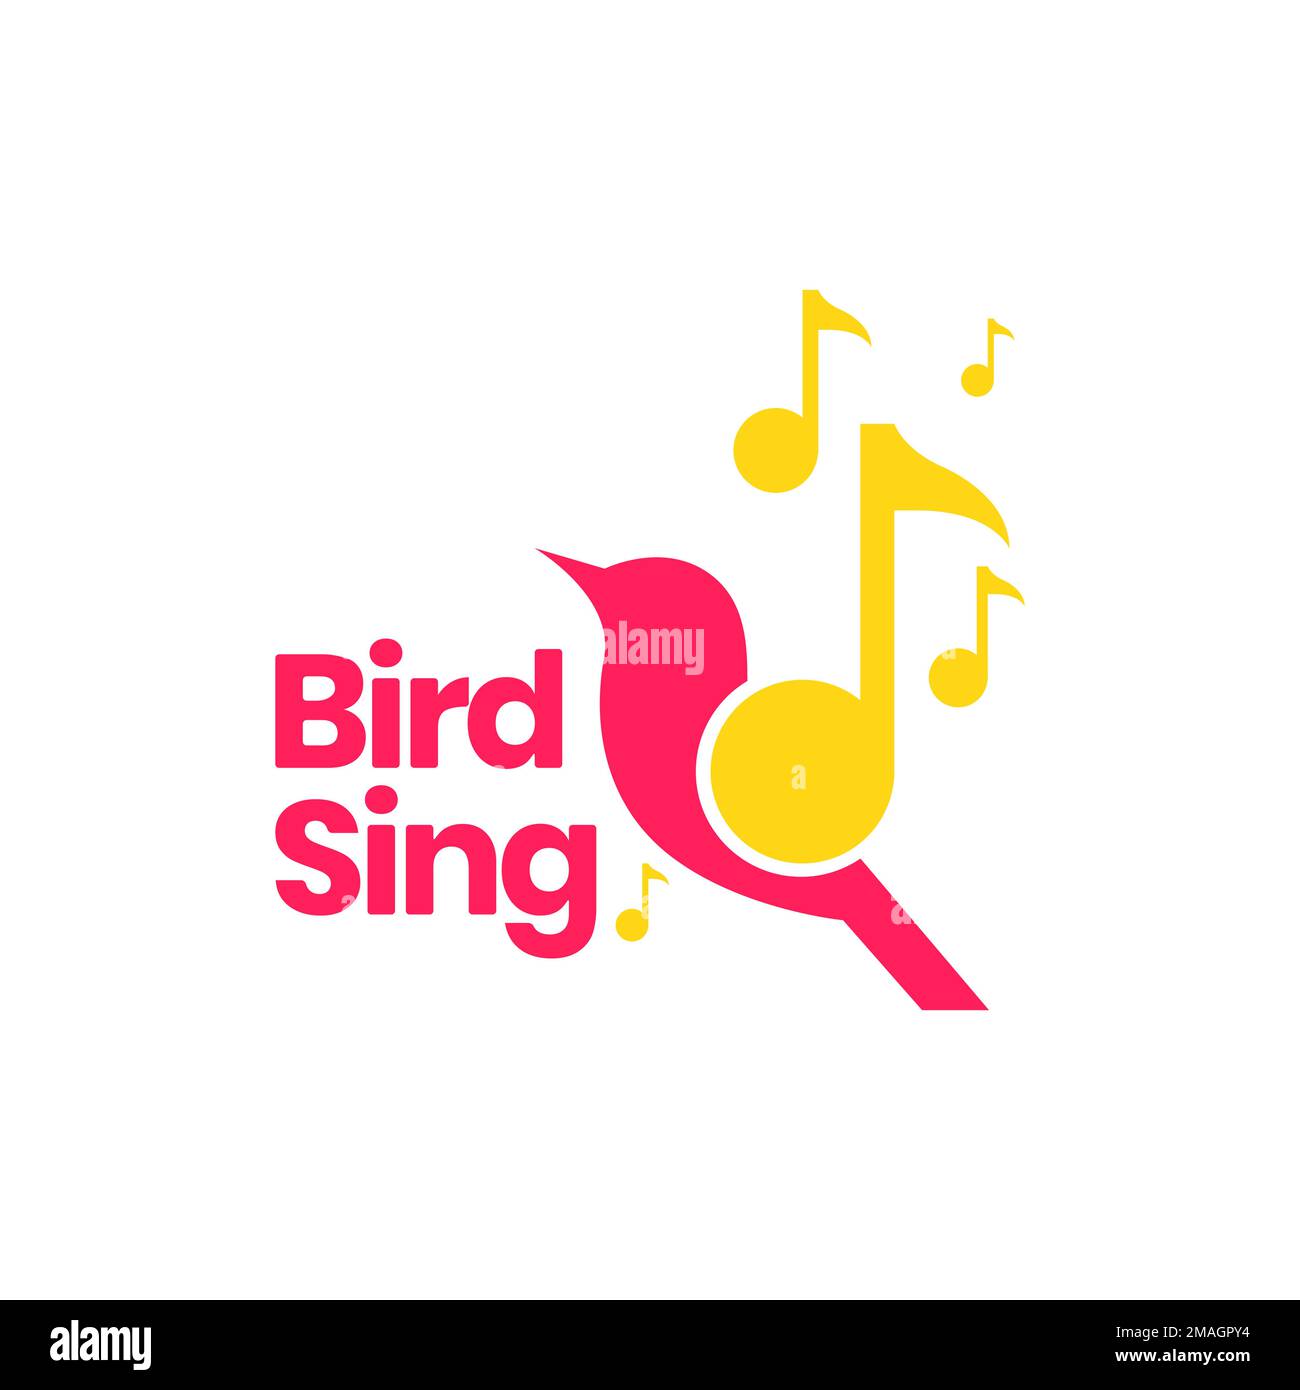 bird sing notes music instrument voice colorful abstract logo design vector icon illustration template Stock Vector